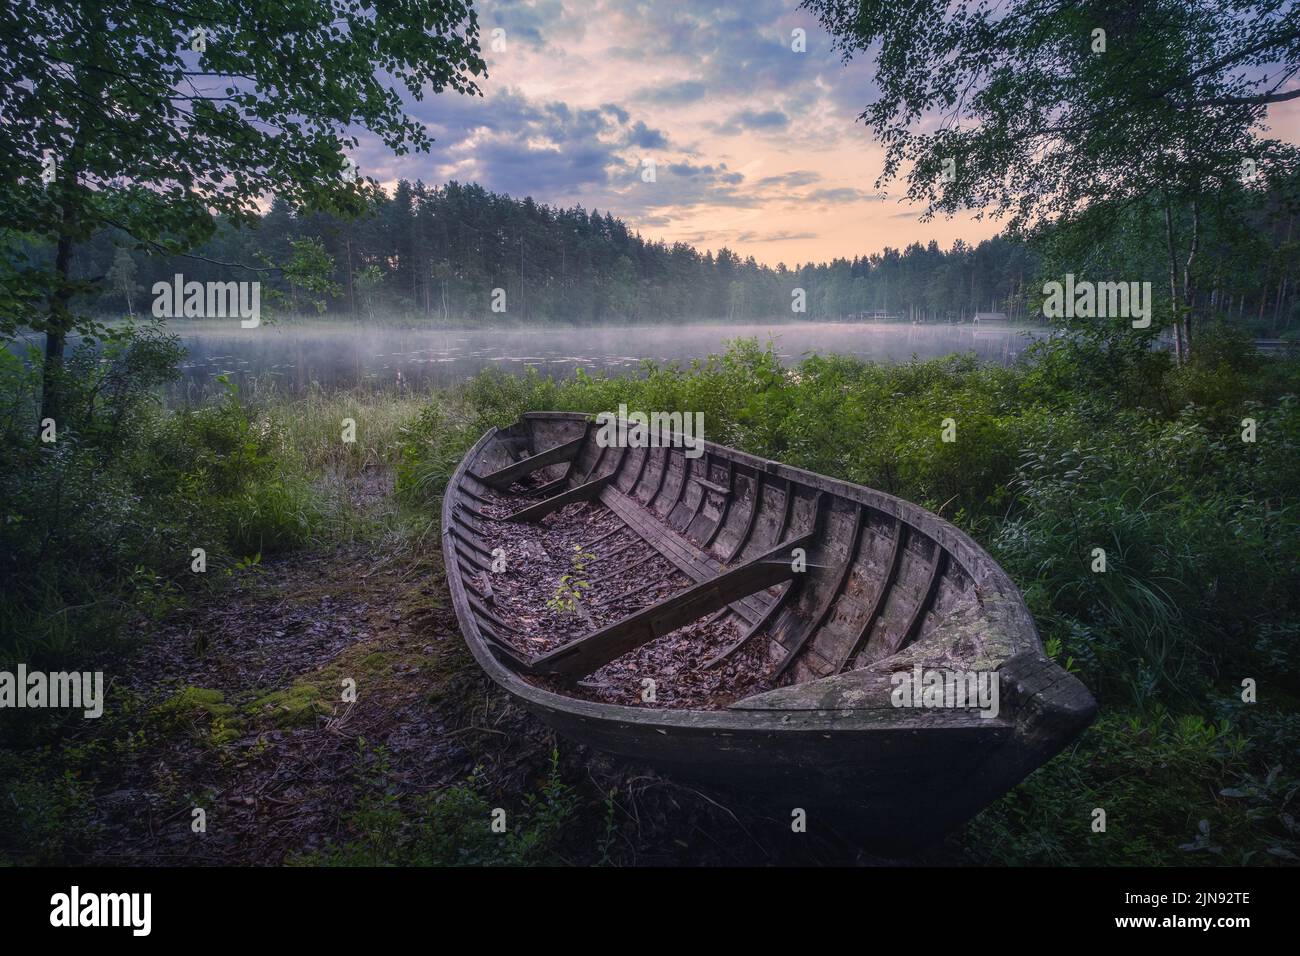 Beautiful sunrise in tranquil lake at summer evening in Finland with wooden boat Stock Photo